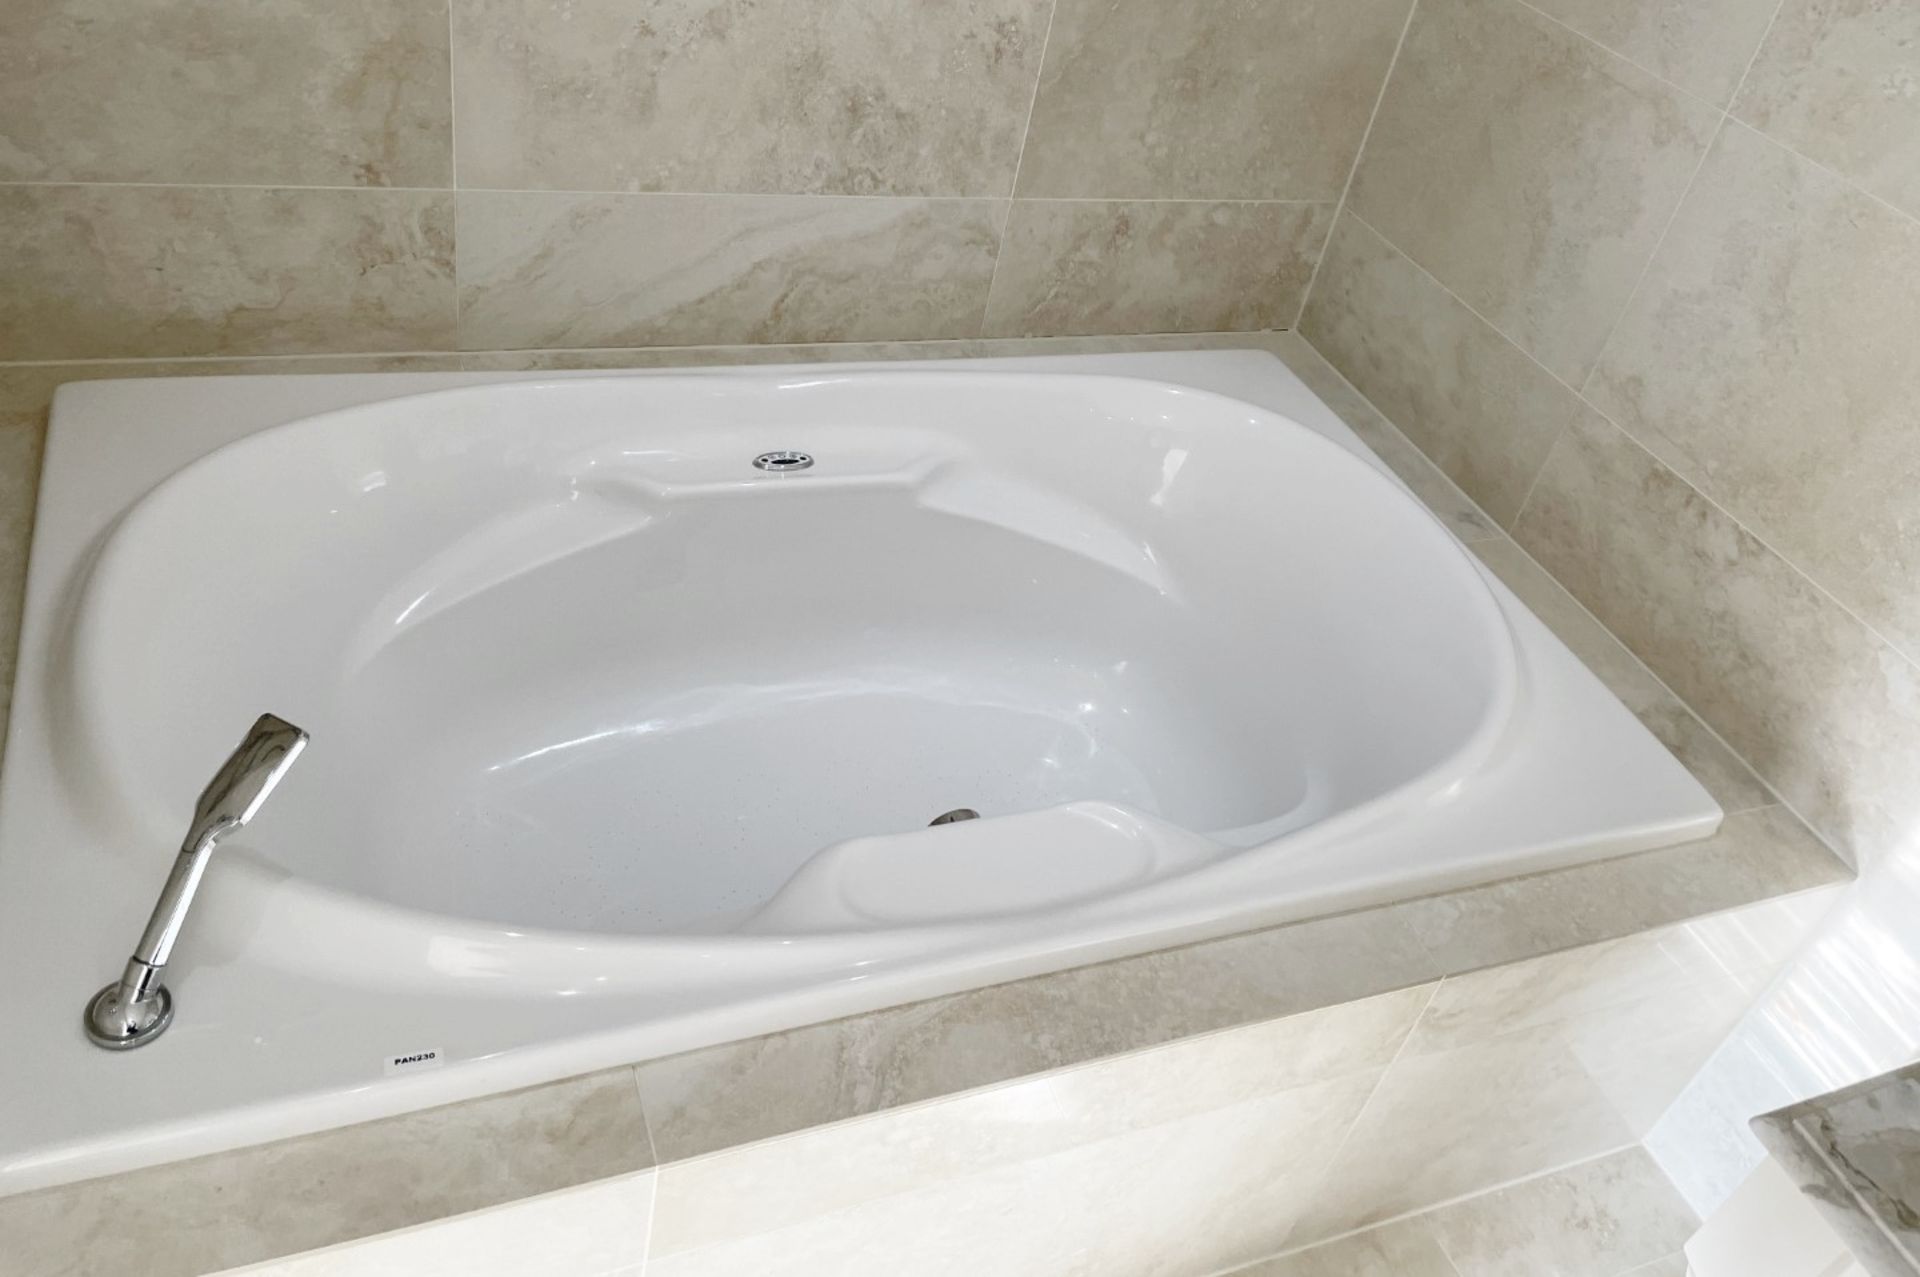 1 x AIRBATH Large Jacuzzi Spa Bath, with Axor Thermostat  - Ref: PAN230 Bed1/bth - CL896 - NO VAT - Image 2 of 20